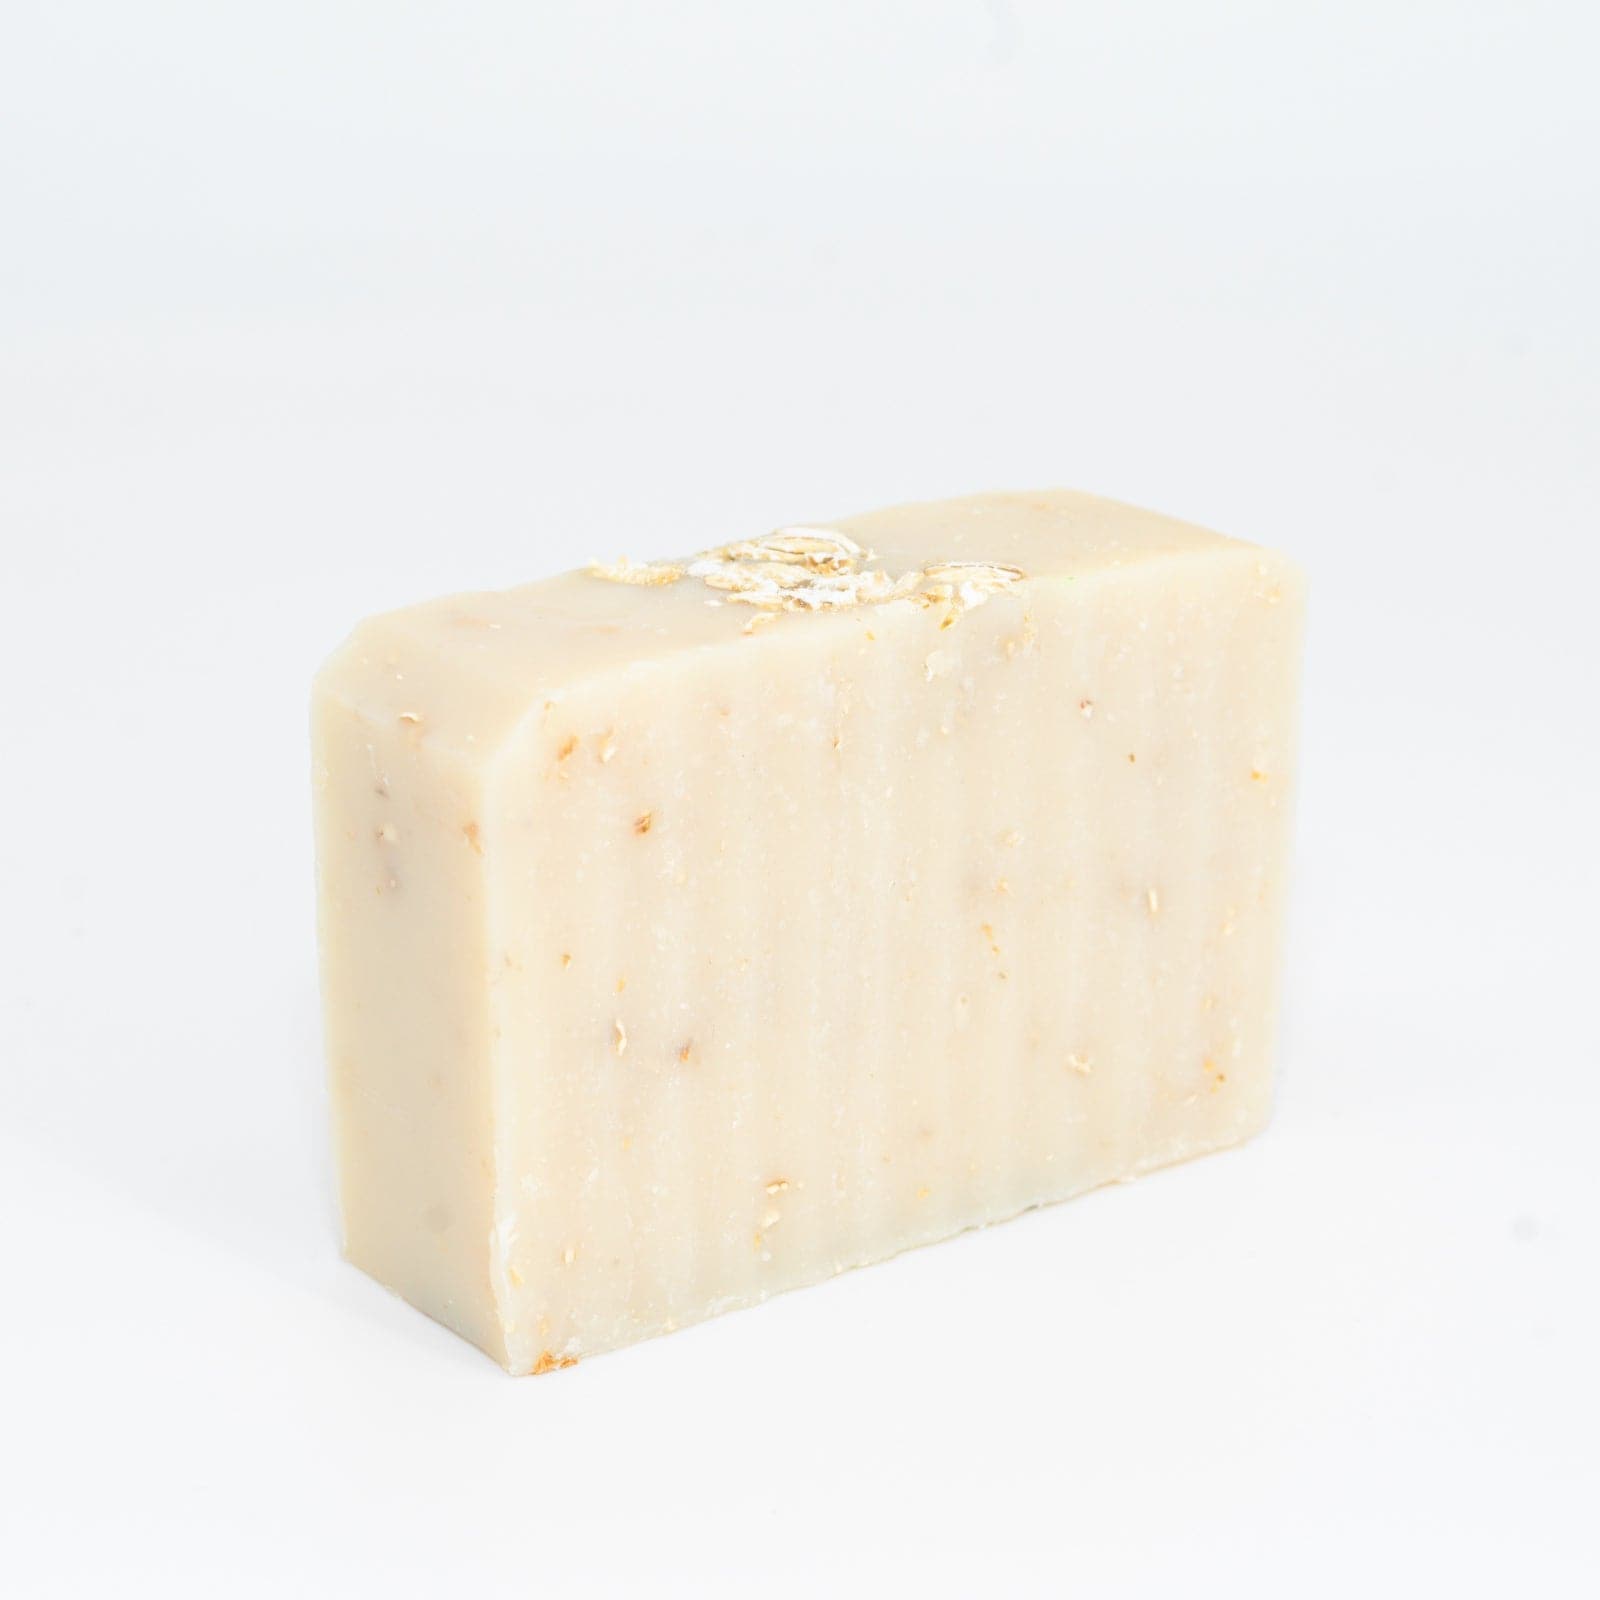 Bar of Oatmeal Honey Shea Butter Soap placed on side